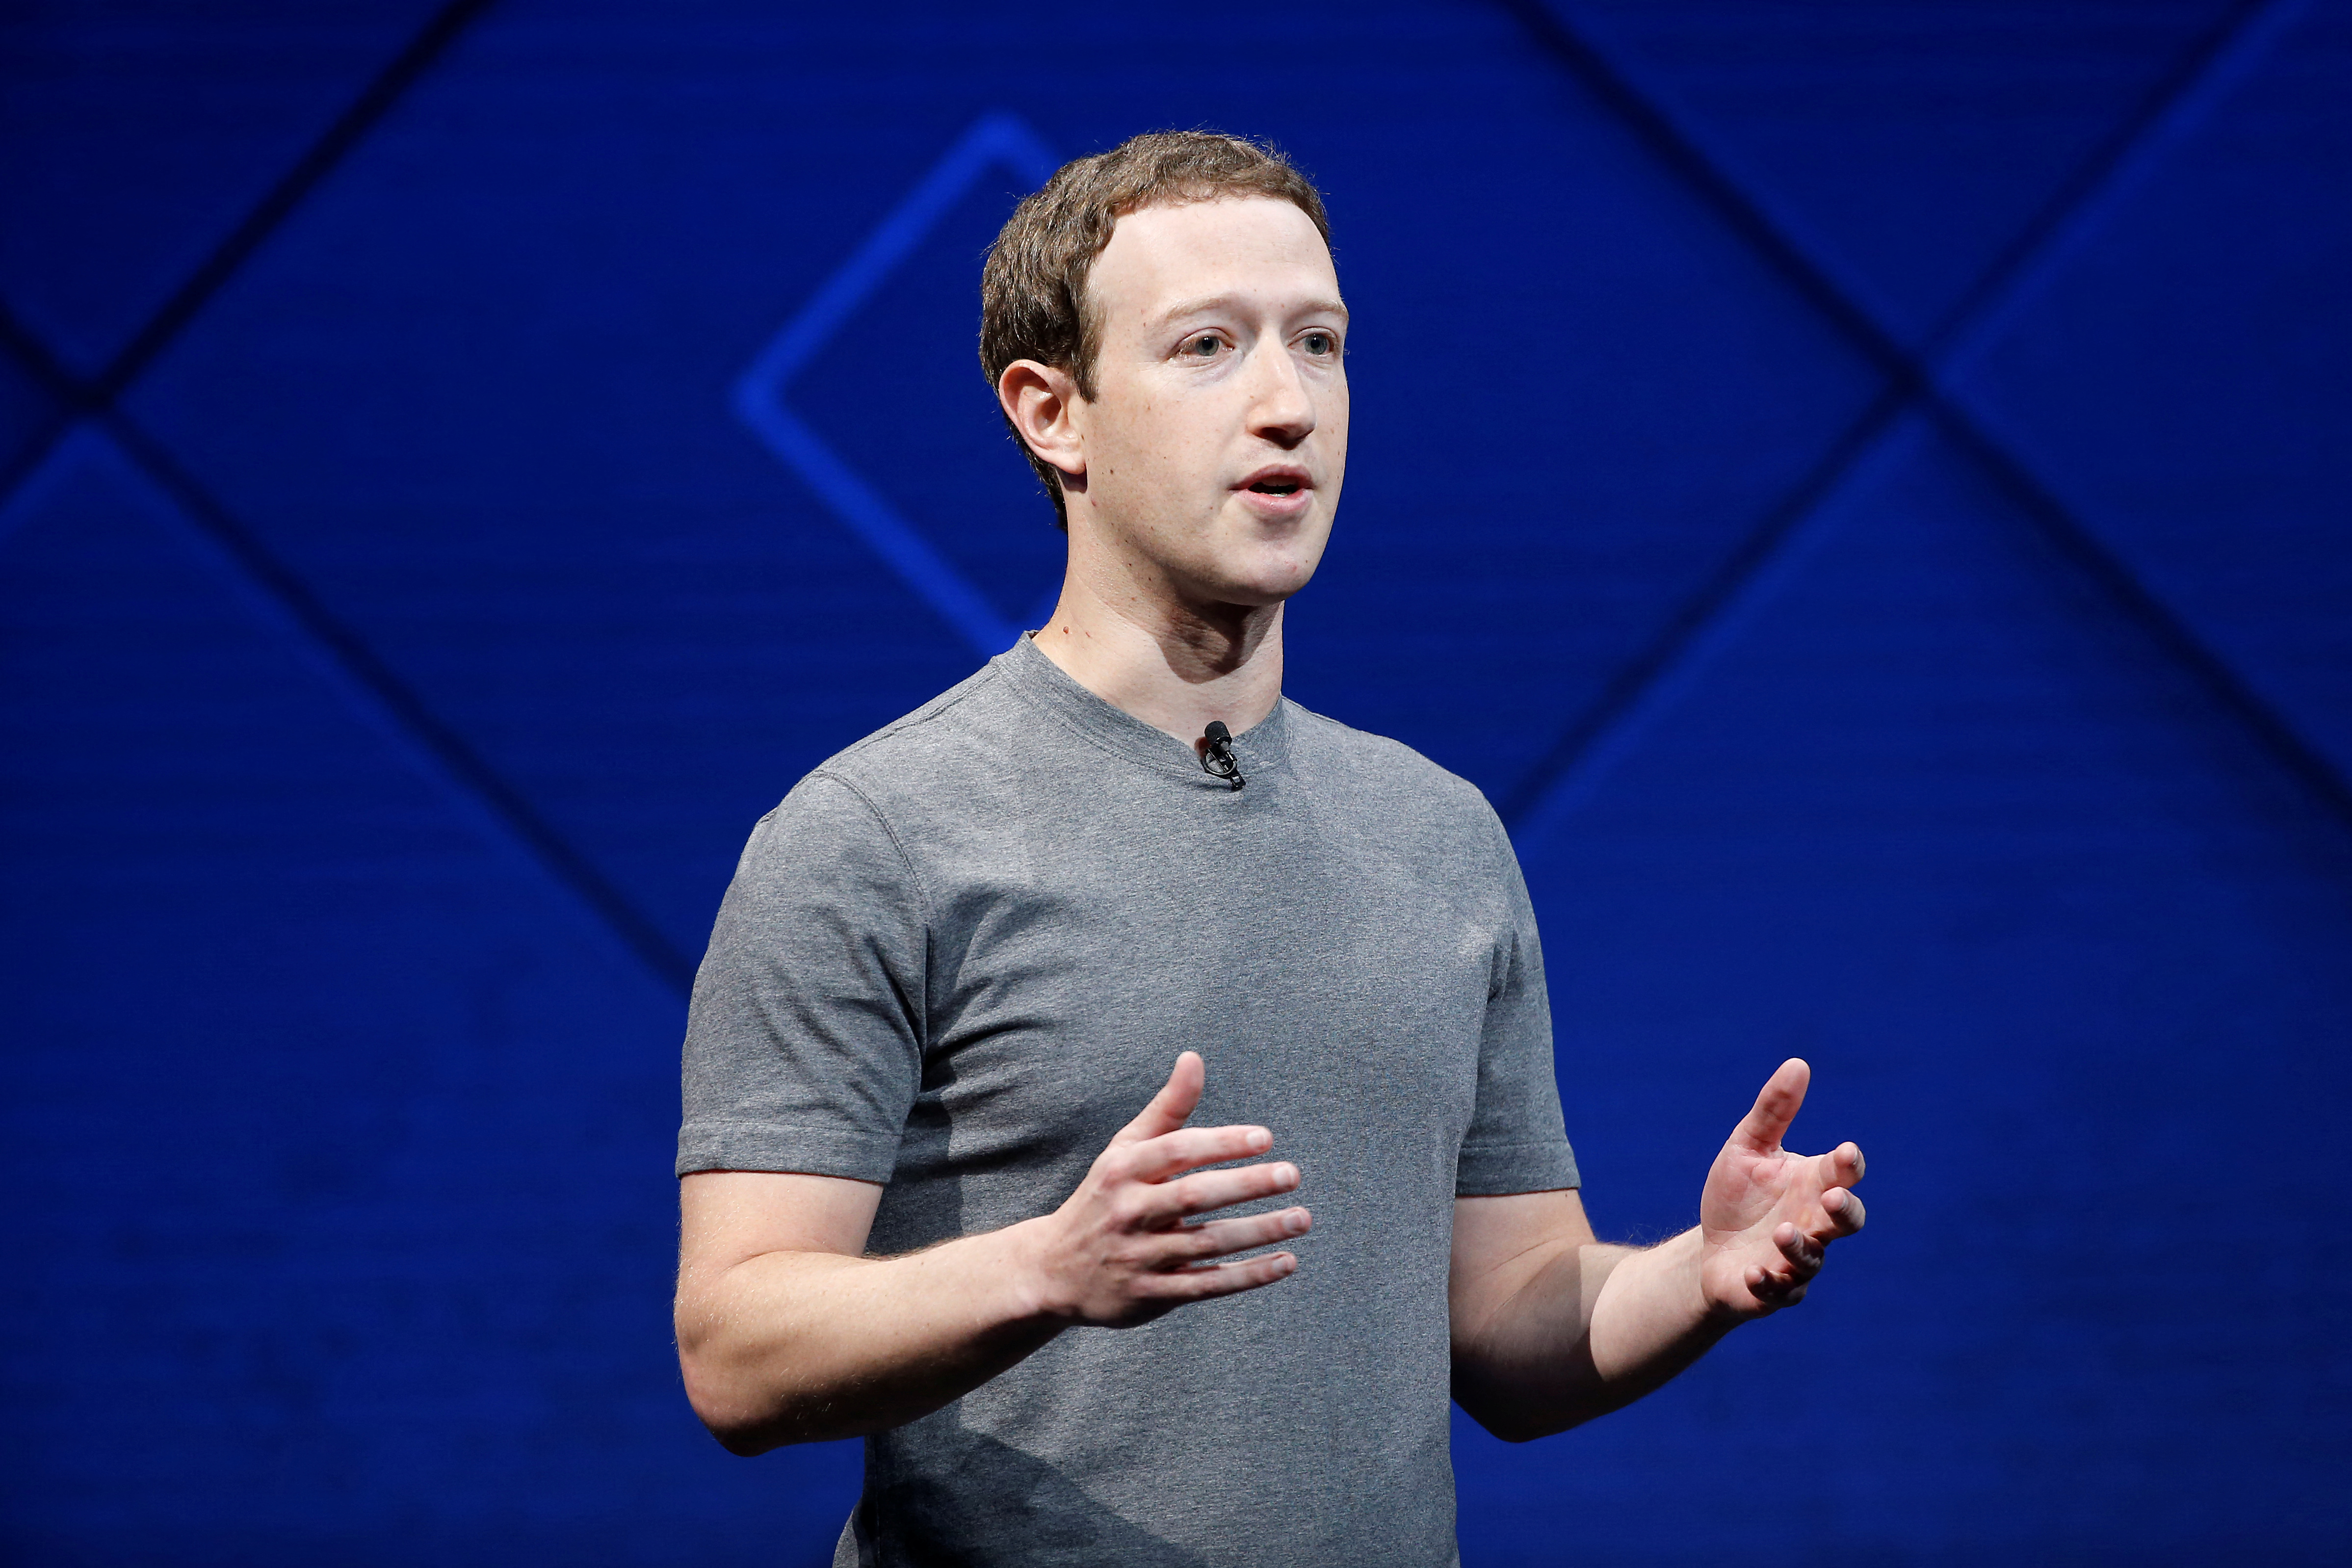 Facebook holds annual F8 developers conference in San Jose, California